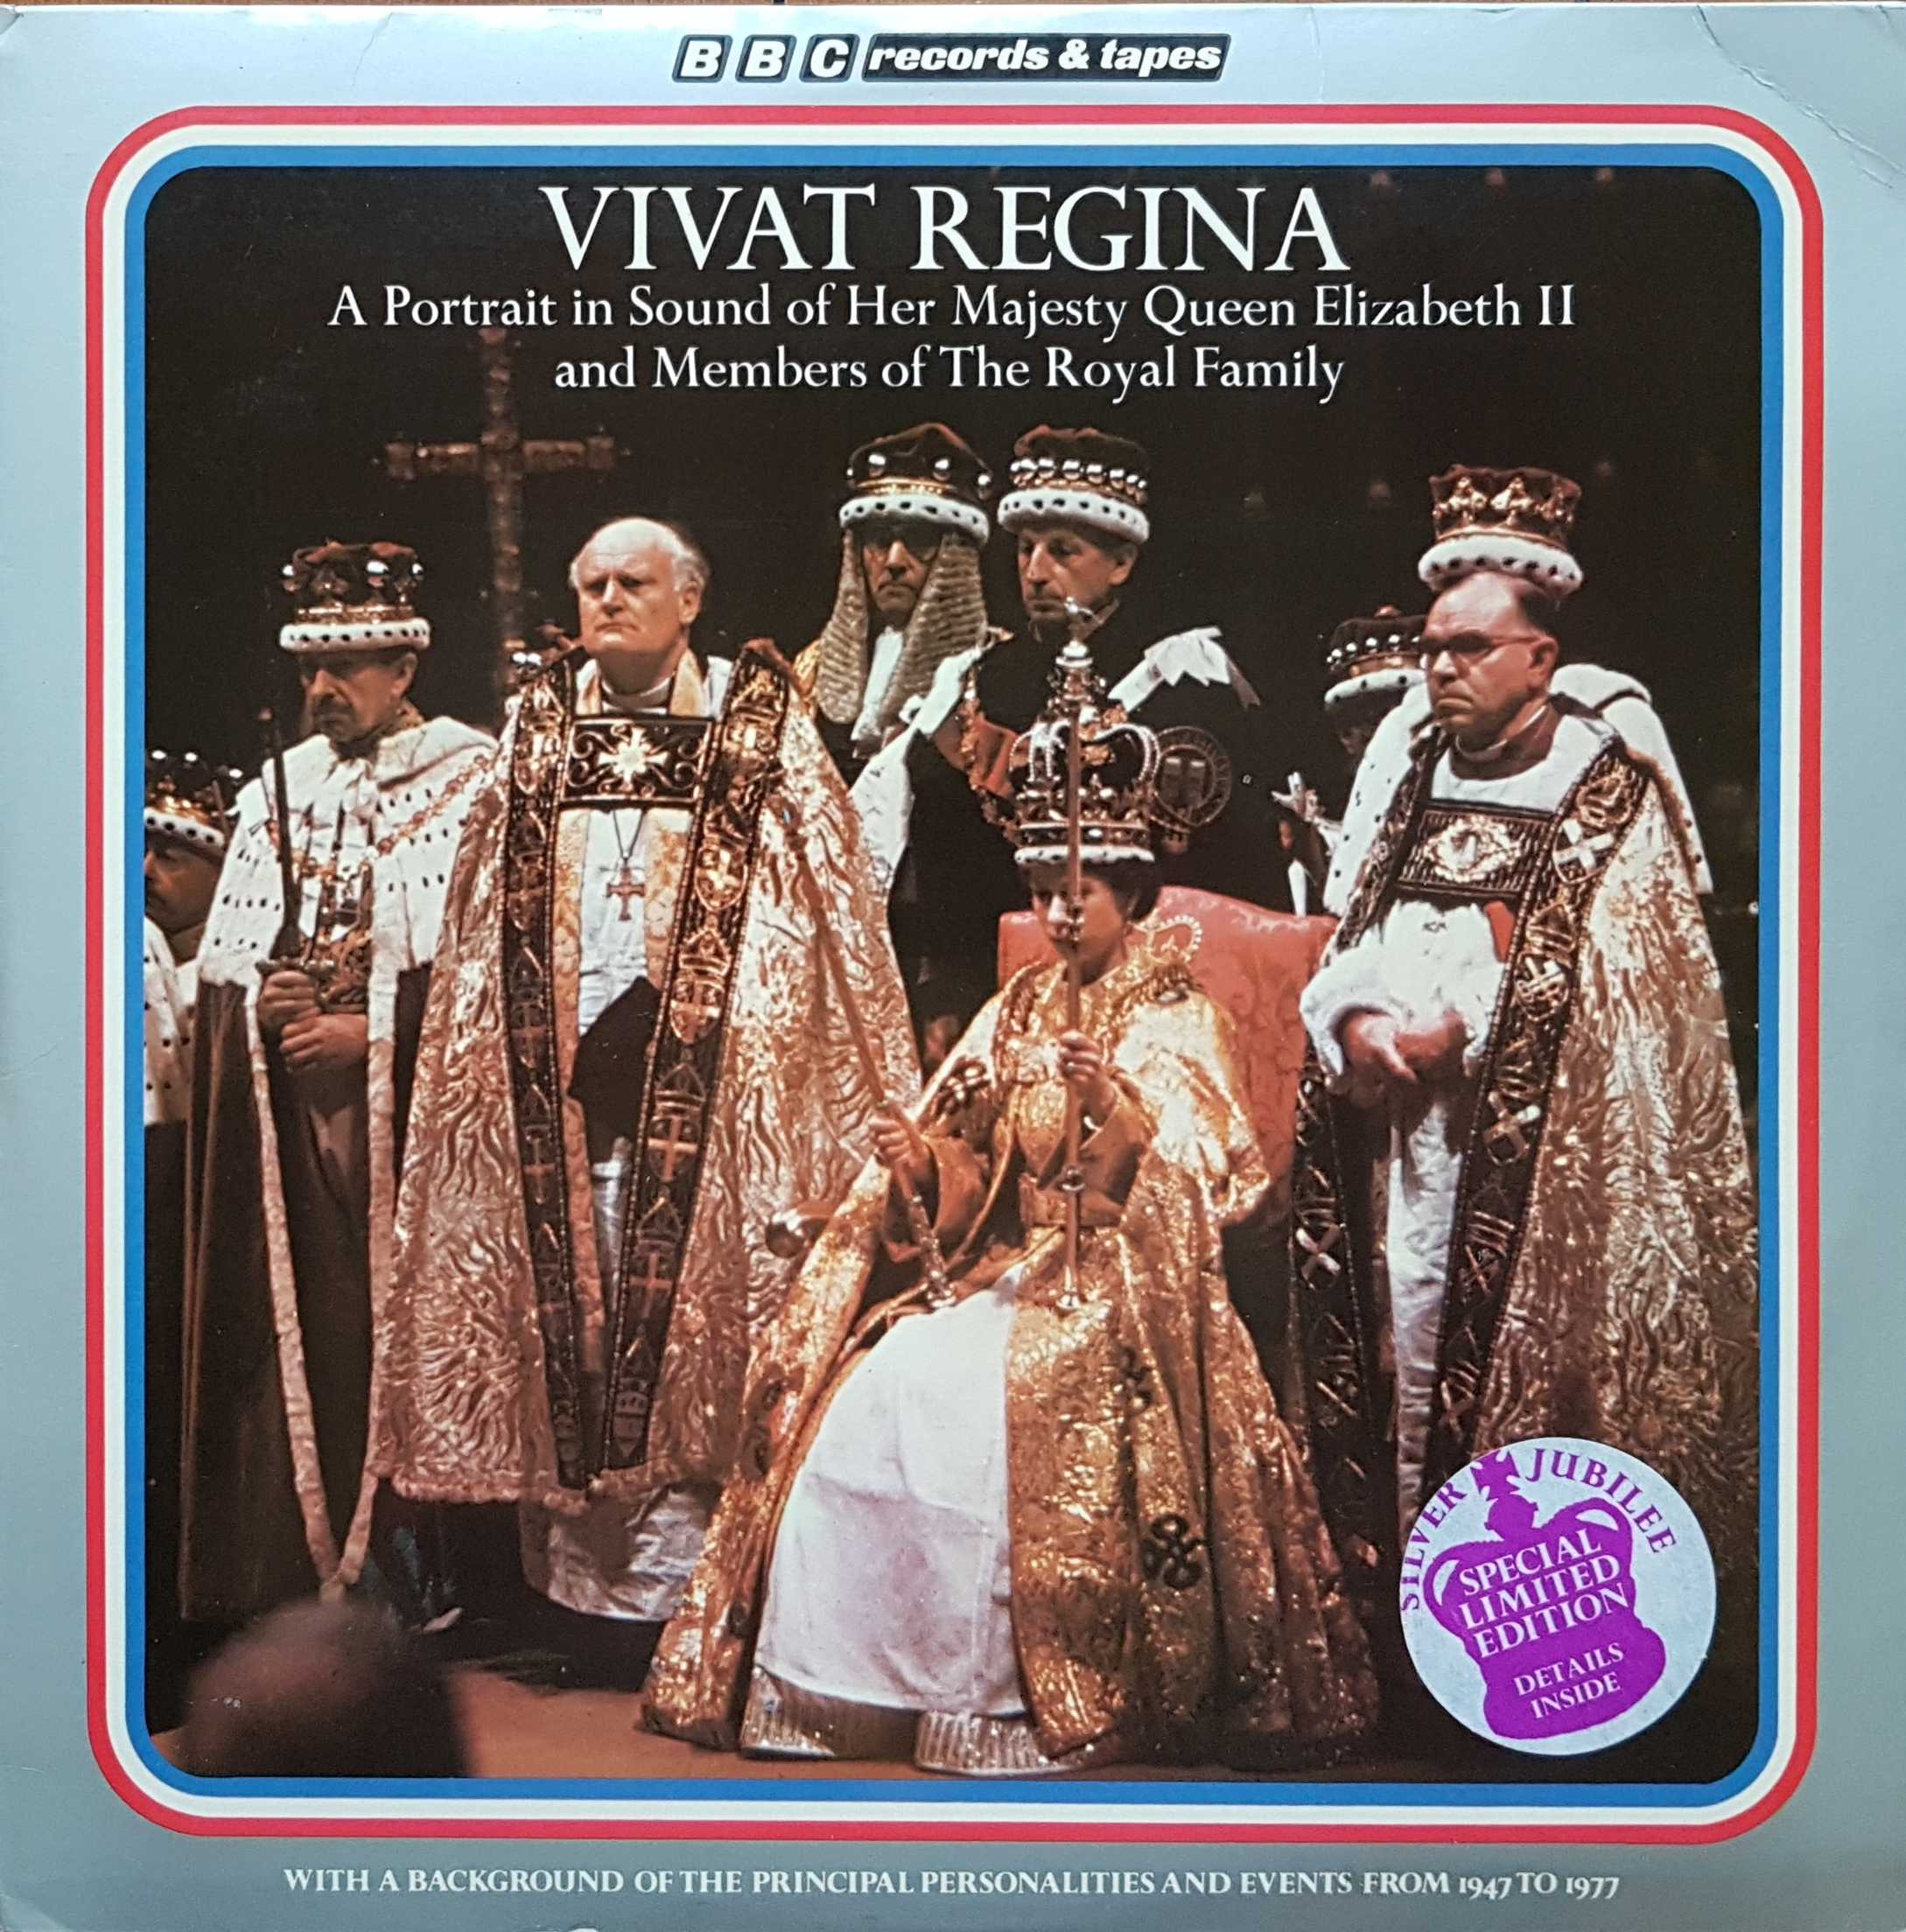 Picture of REL 273 The silver jubilee - Vivat regina (Limited edition) by artist Robert Hudson from the BBC albums - Records and Tapes library